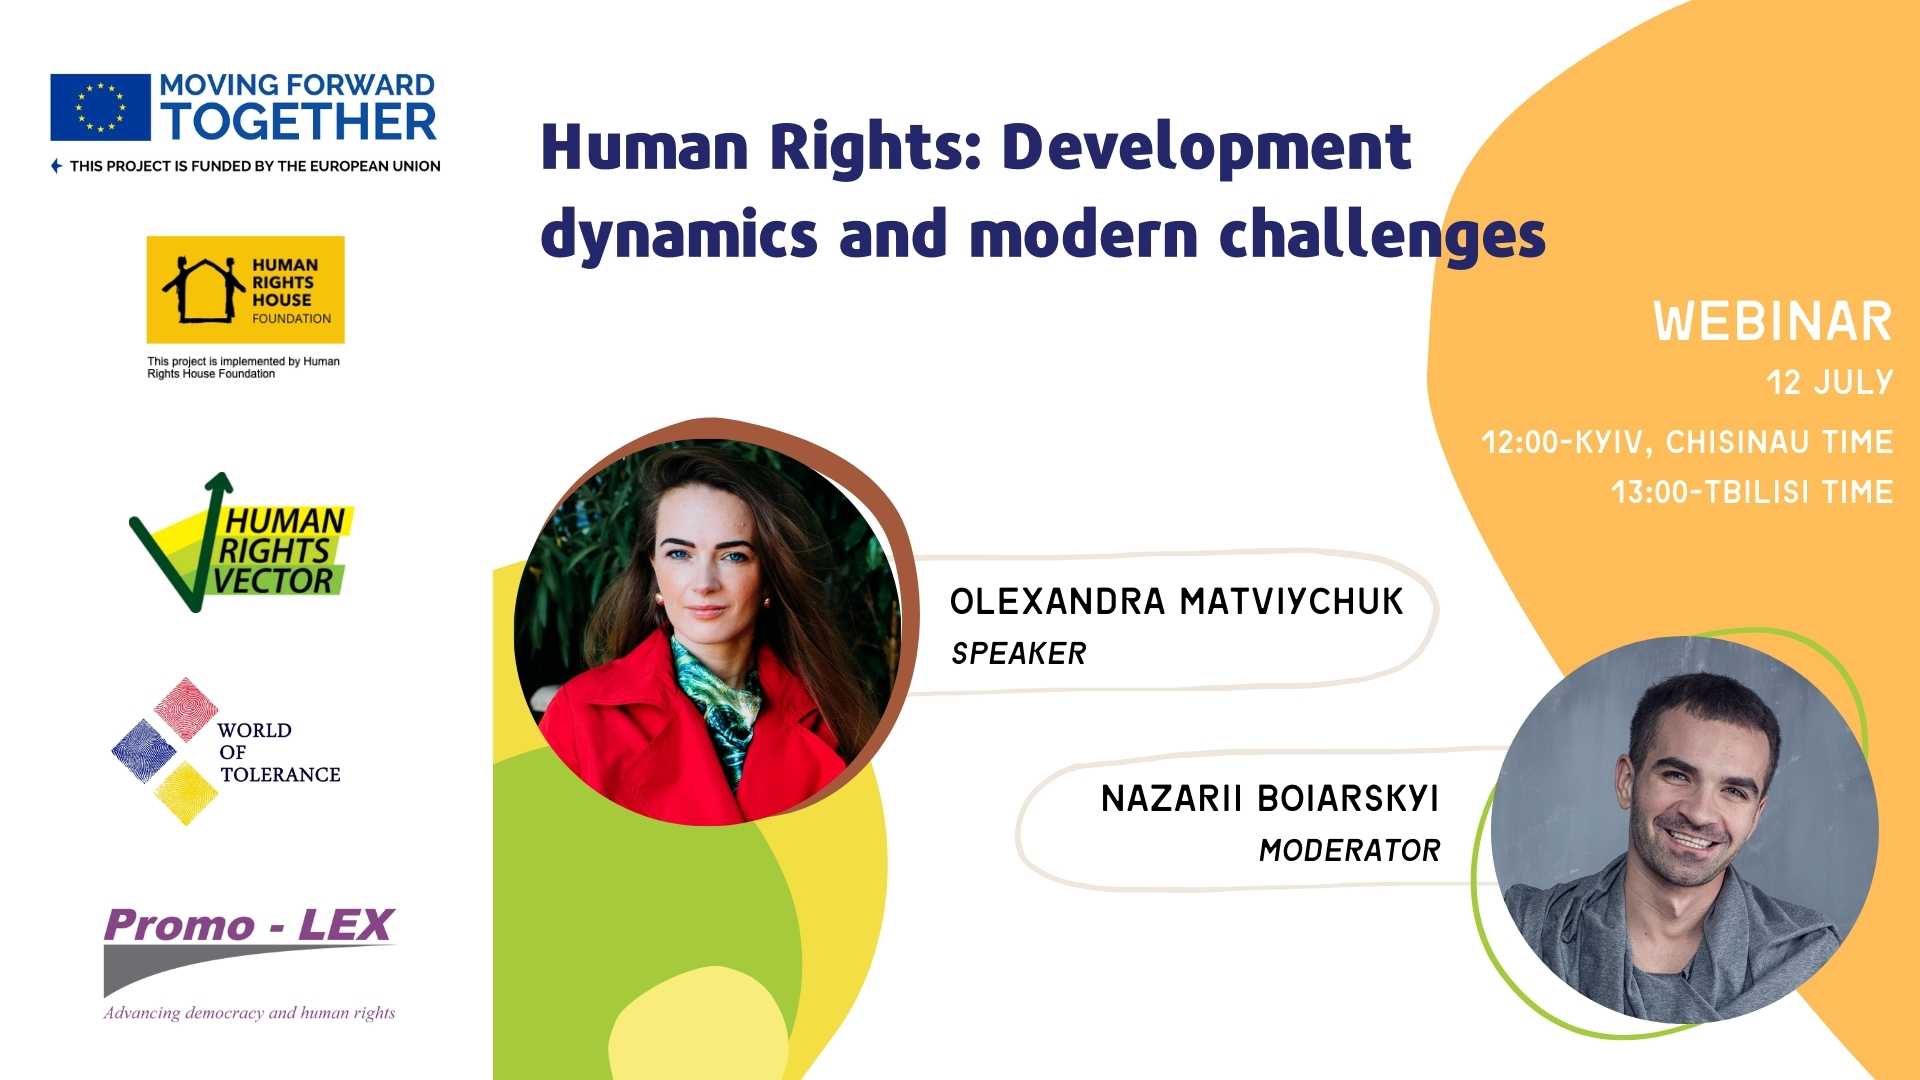 We invite you to the webinar “Human Rights: Development dynamics and modern challenges”